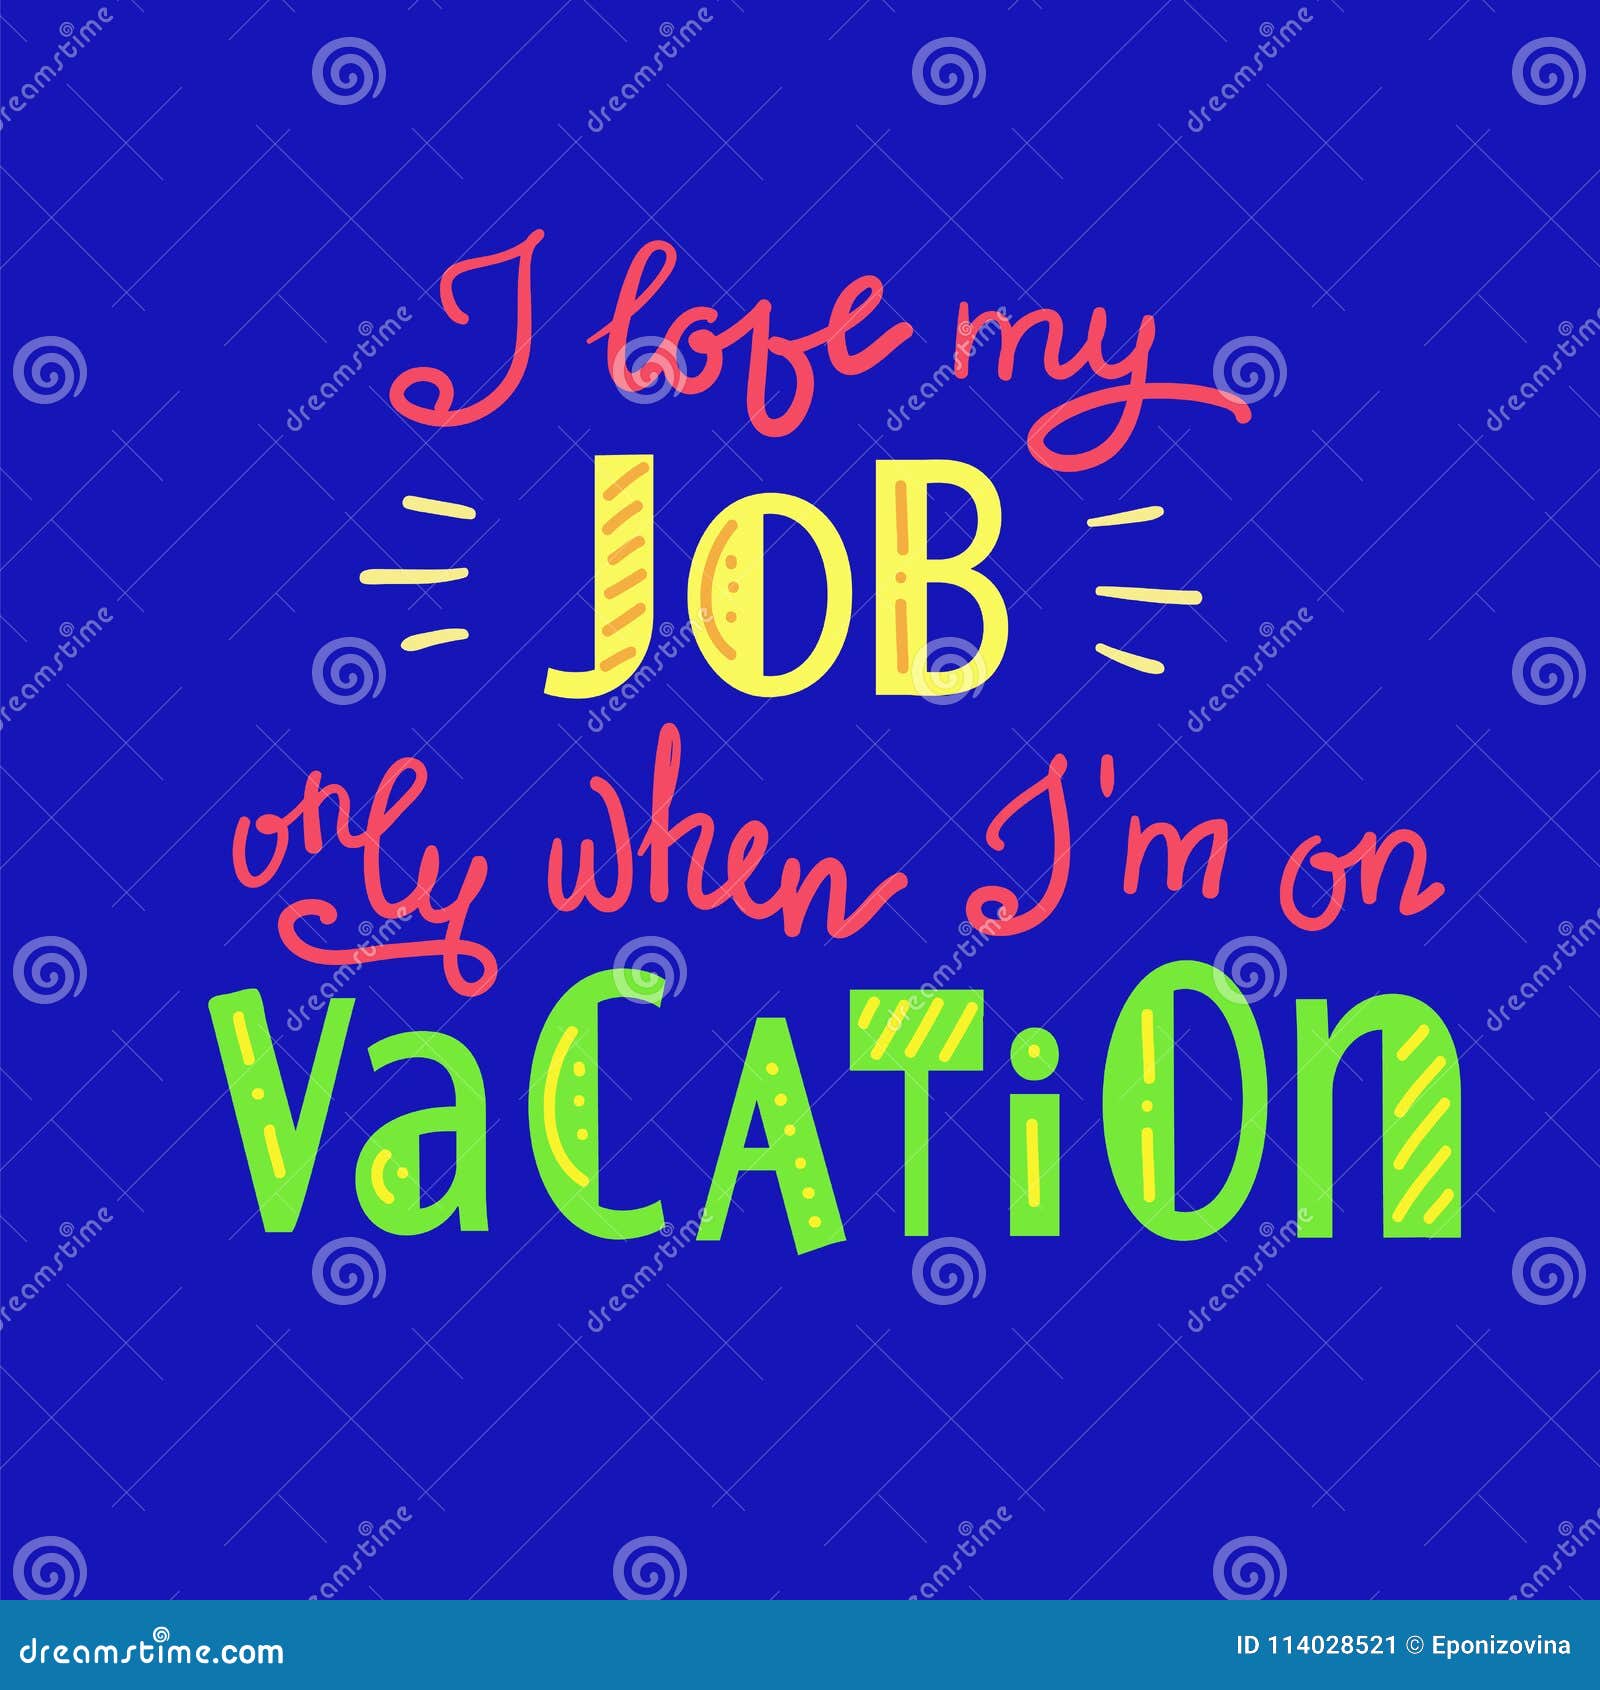 I love my job but i want to travel